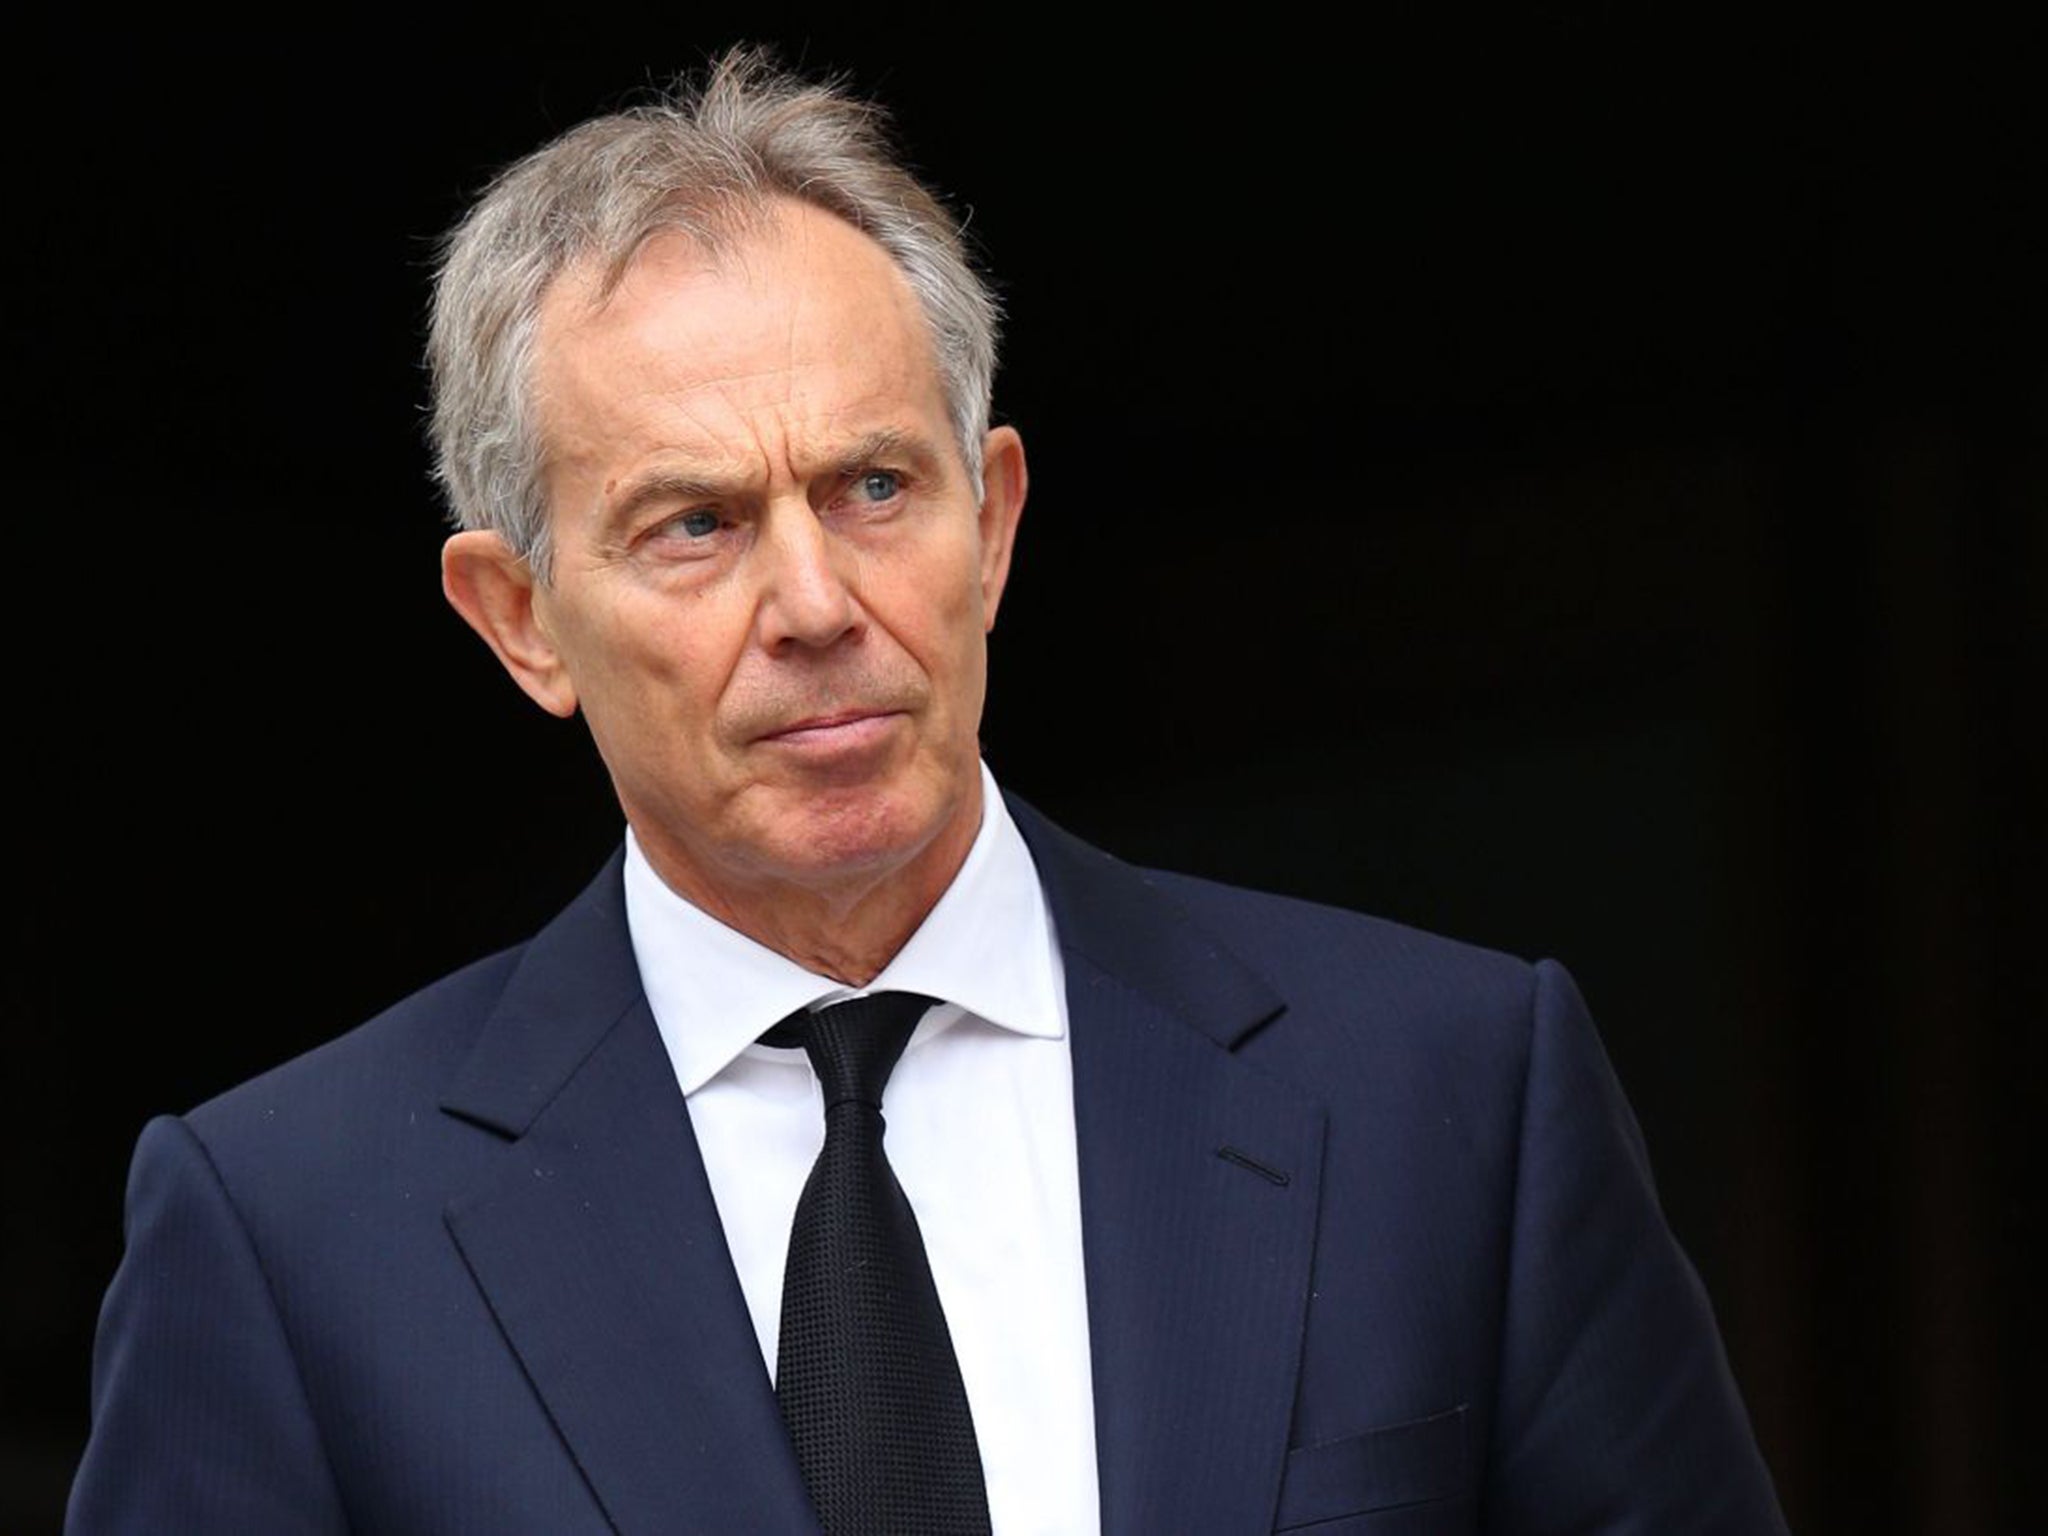 Tony Blair’s earnings would be made public if a Tory backbench motion is passed (AFP)